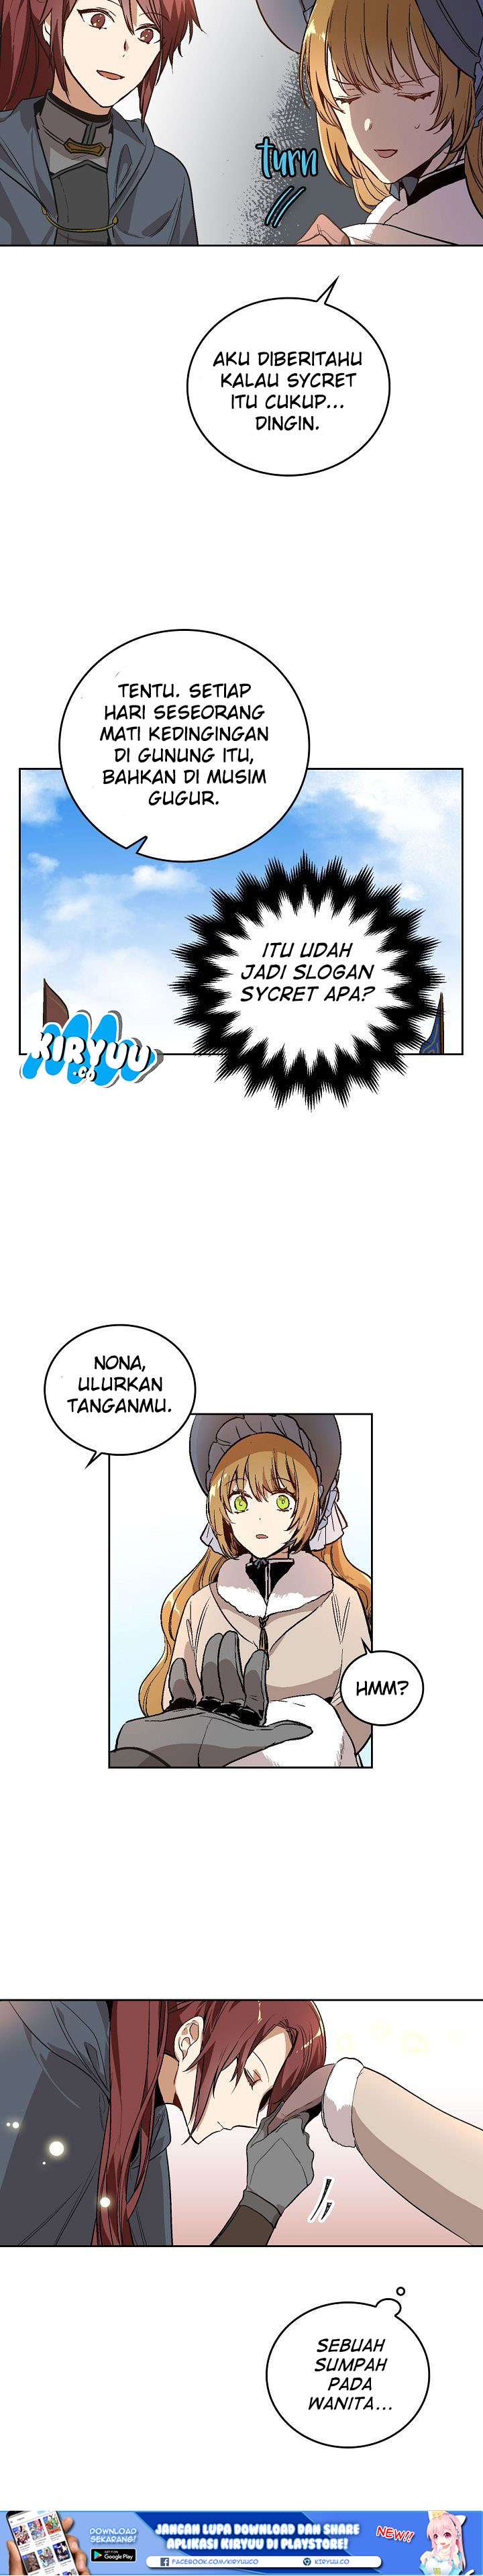 The Reason Why Raeliana Ended Up at the Duke’s Mansion Chapter 30 Bahasa Indonesia